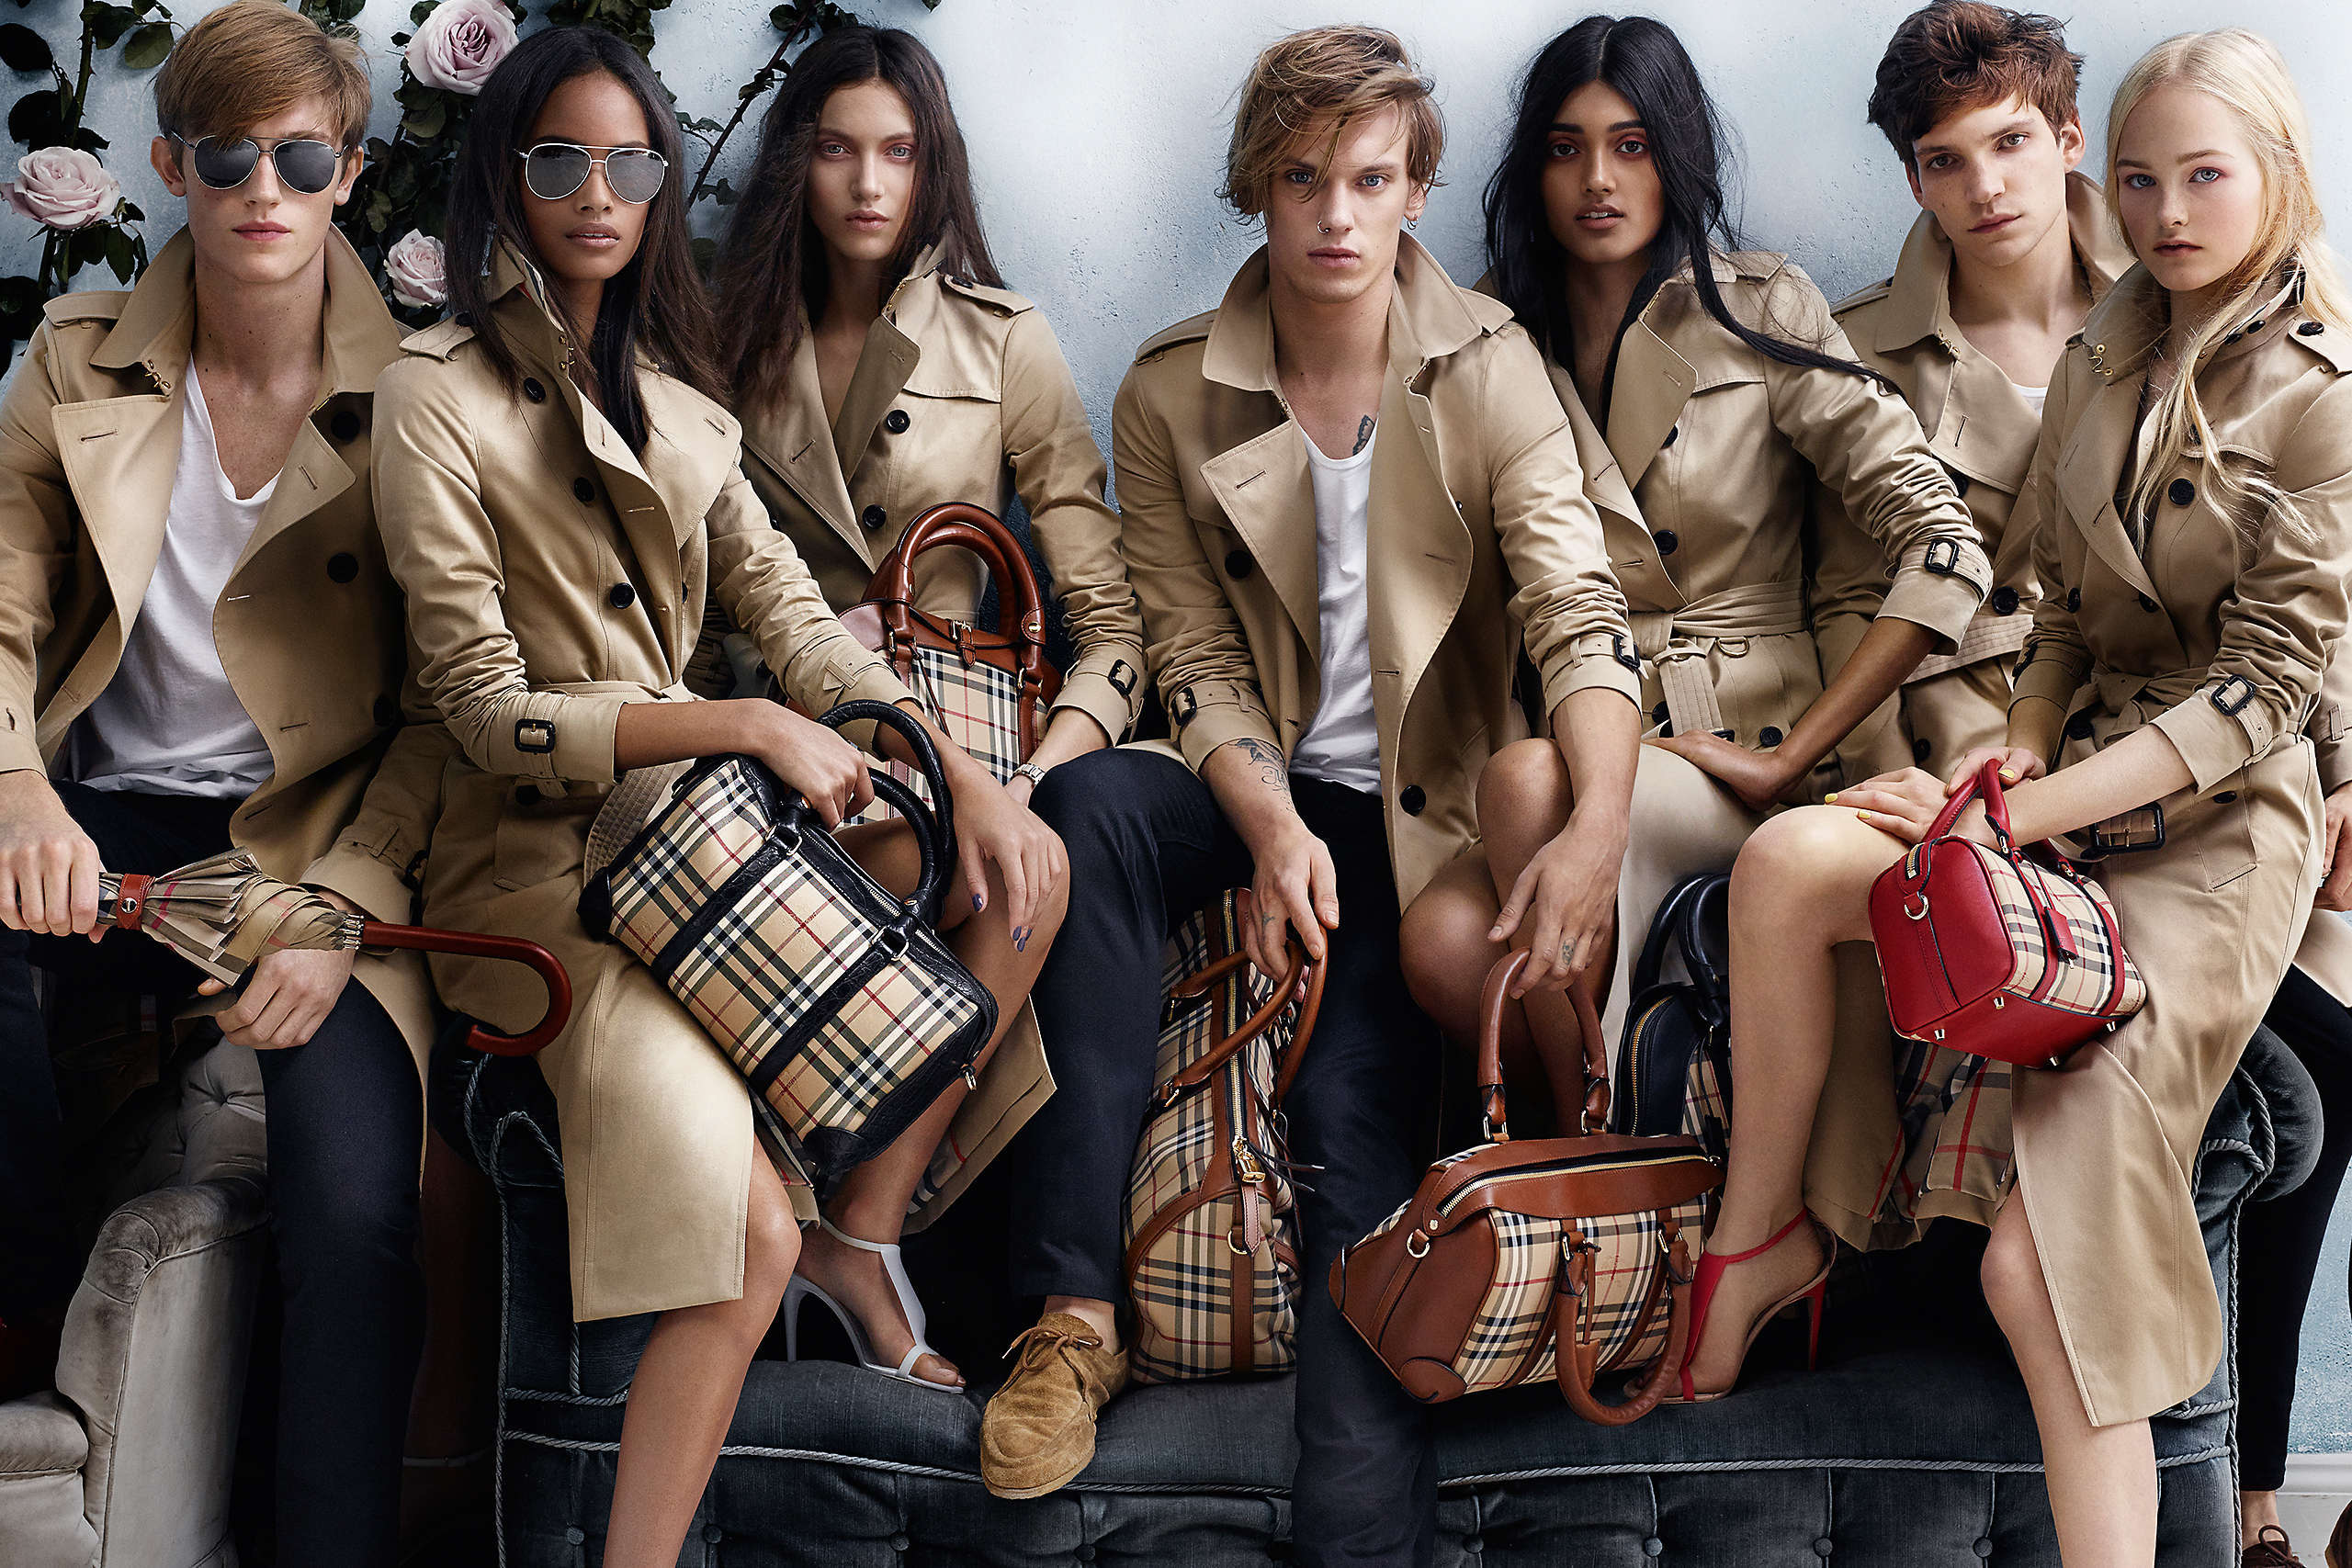 Clothing for young people by Burberry wallpaper and image